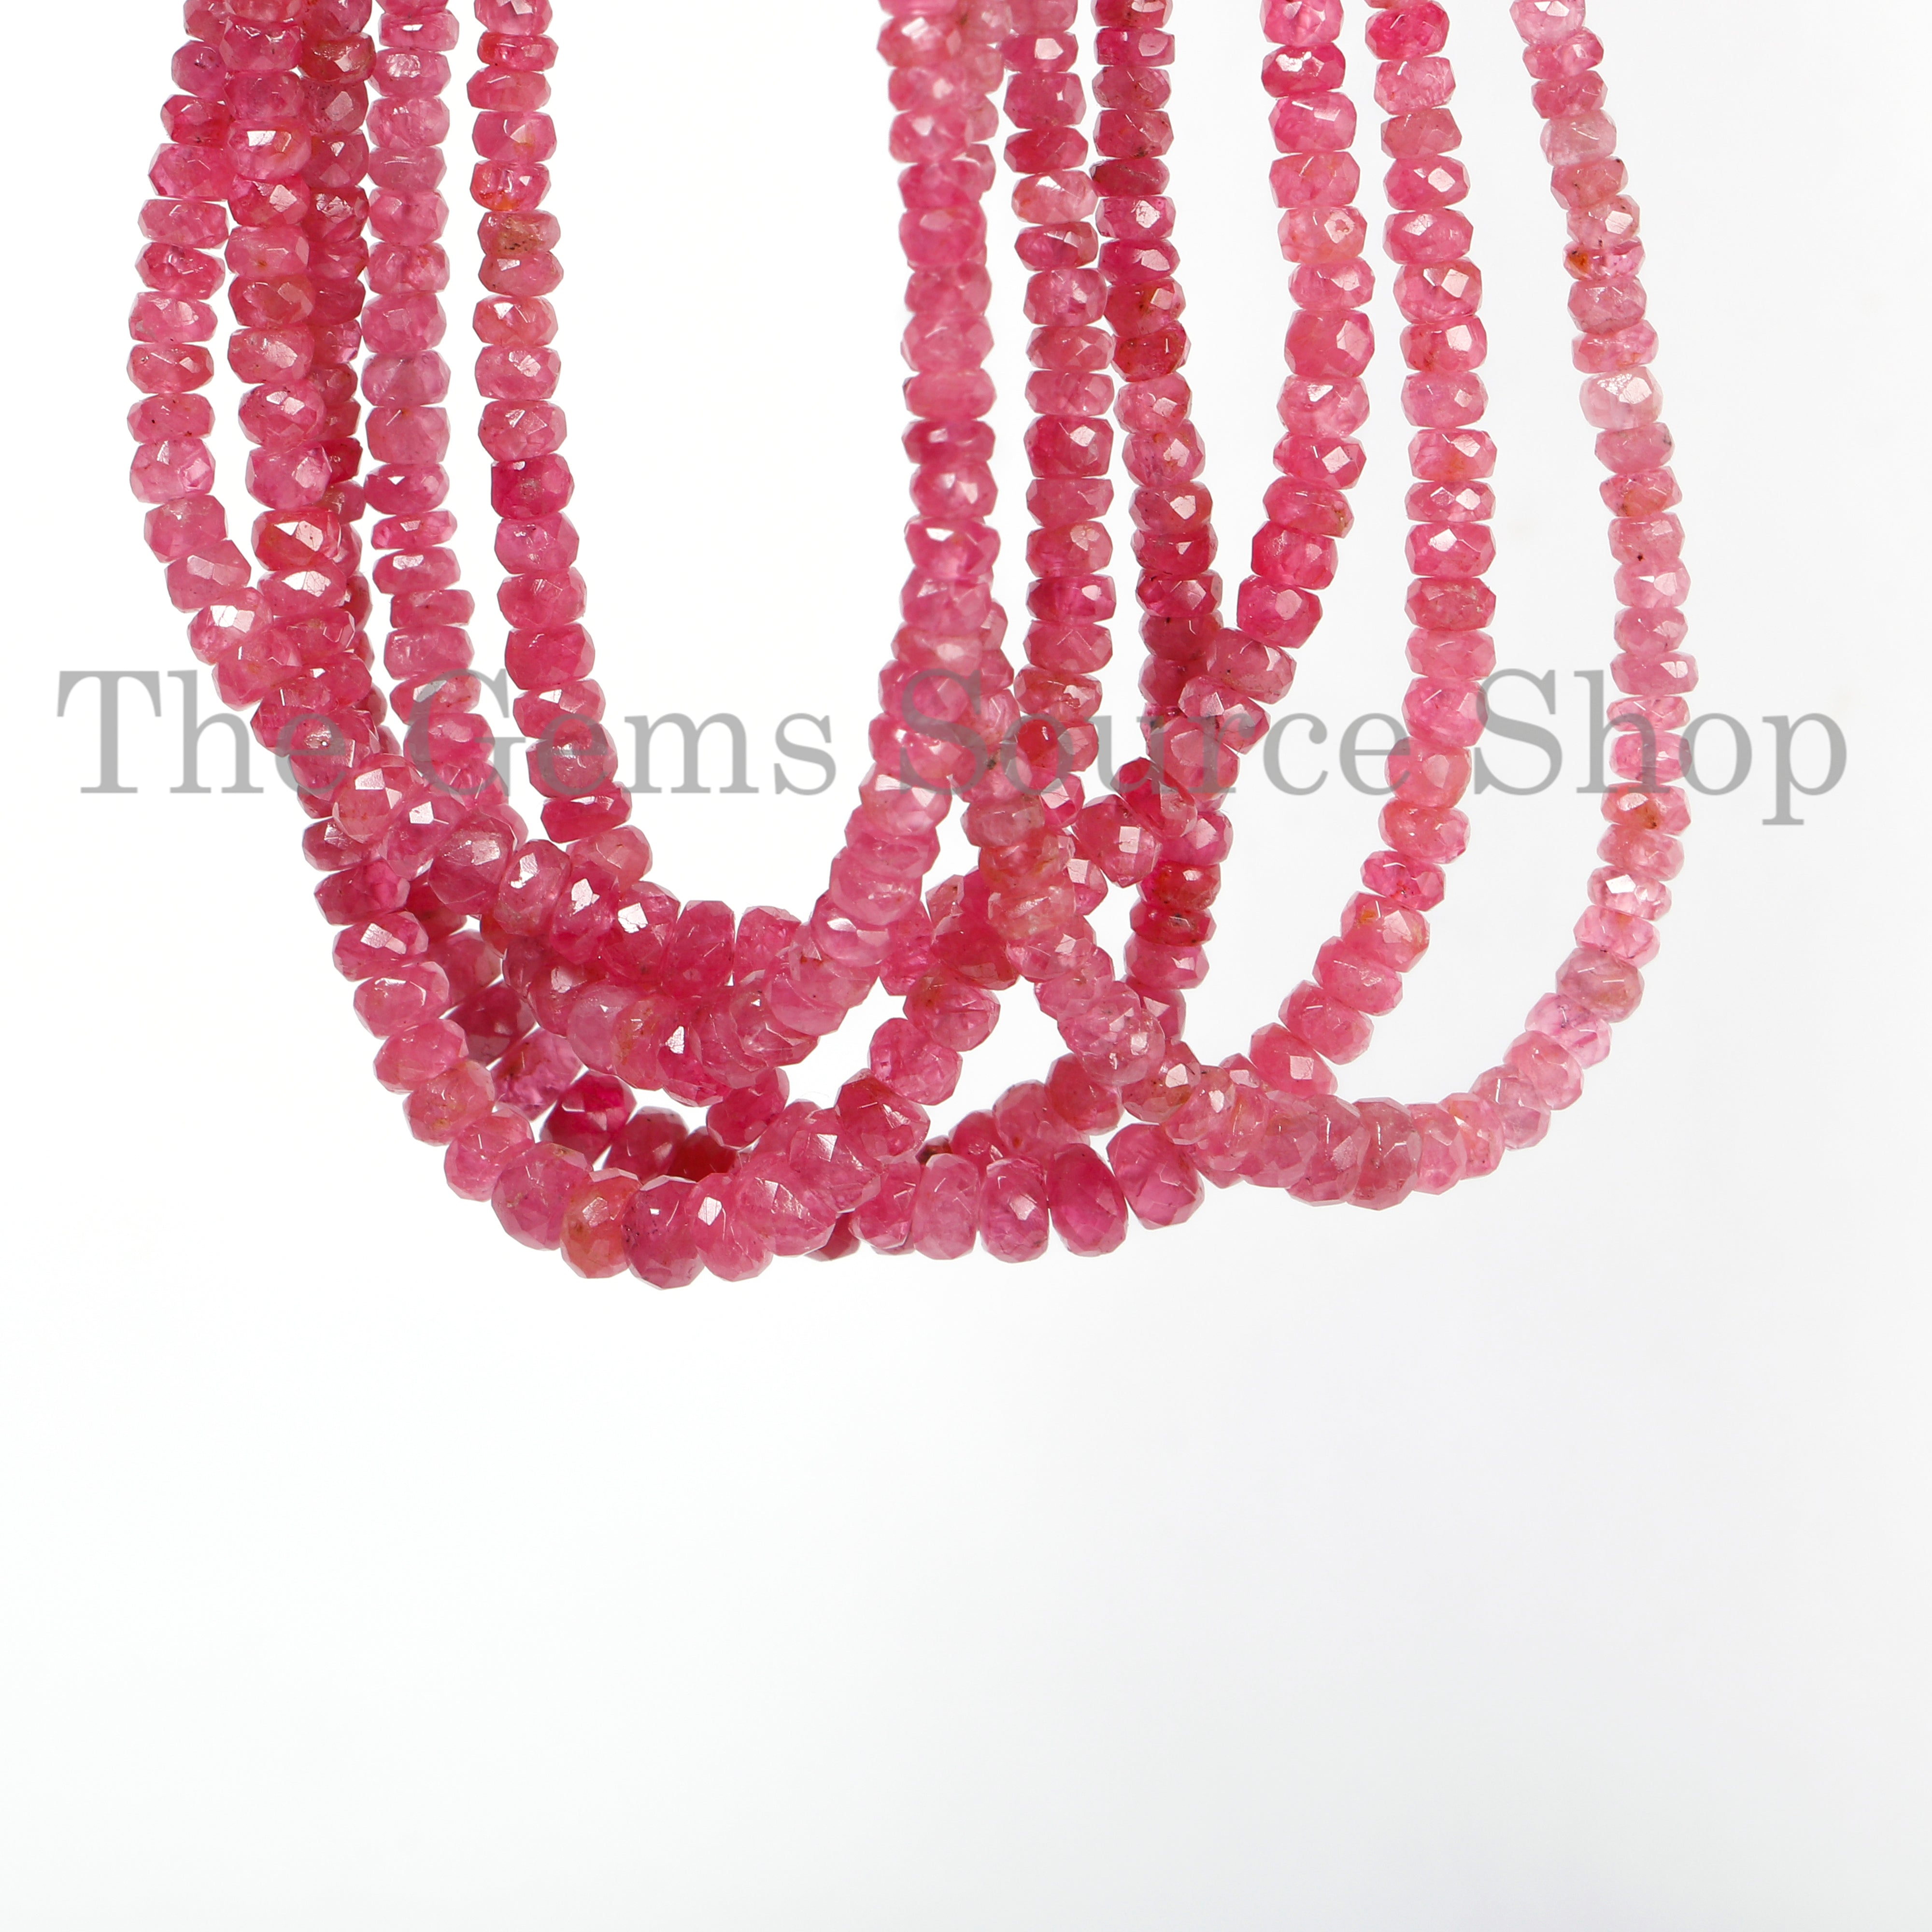 Red Spinel Beads, Spinel Rondelle Beads, Spinel Faceted Beads, Spinel Gemstone Beads